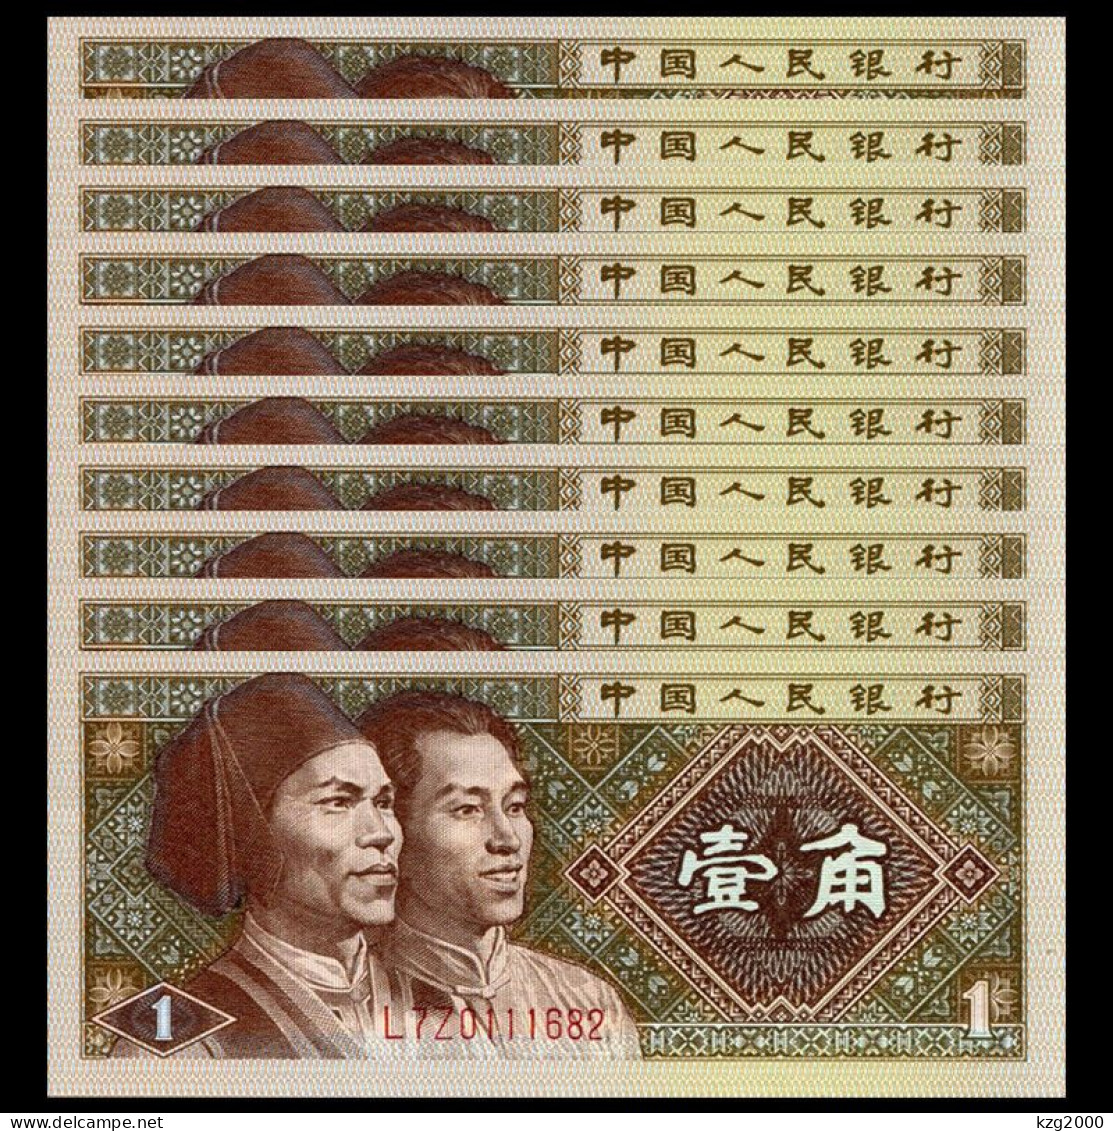 China 1980 Paper Money Banknotes 4th Edition 1Jiao  Banknote UNC 10Pcs  Continuous Number 01-10 - China